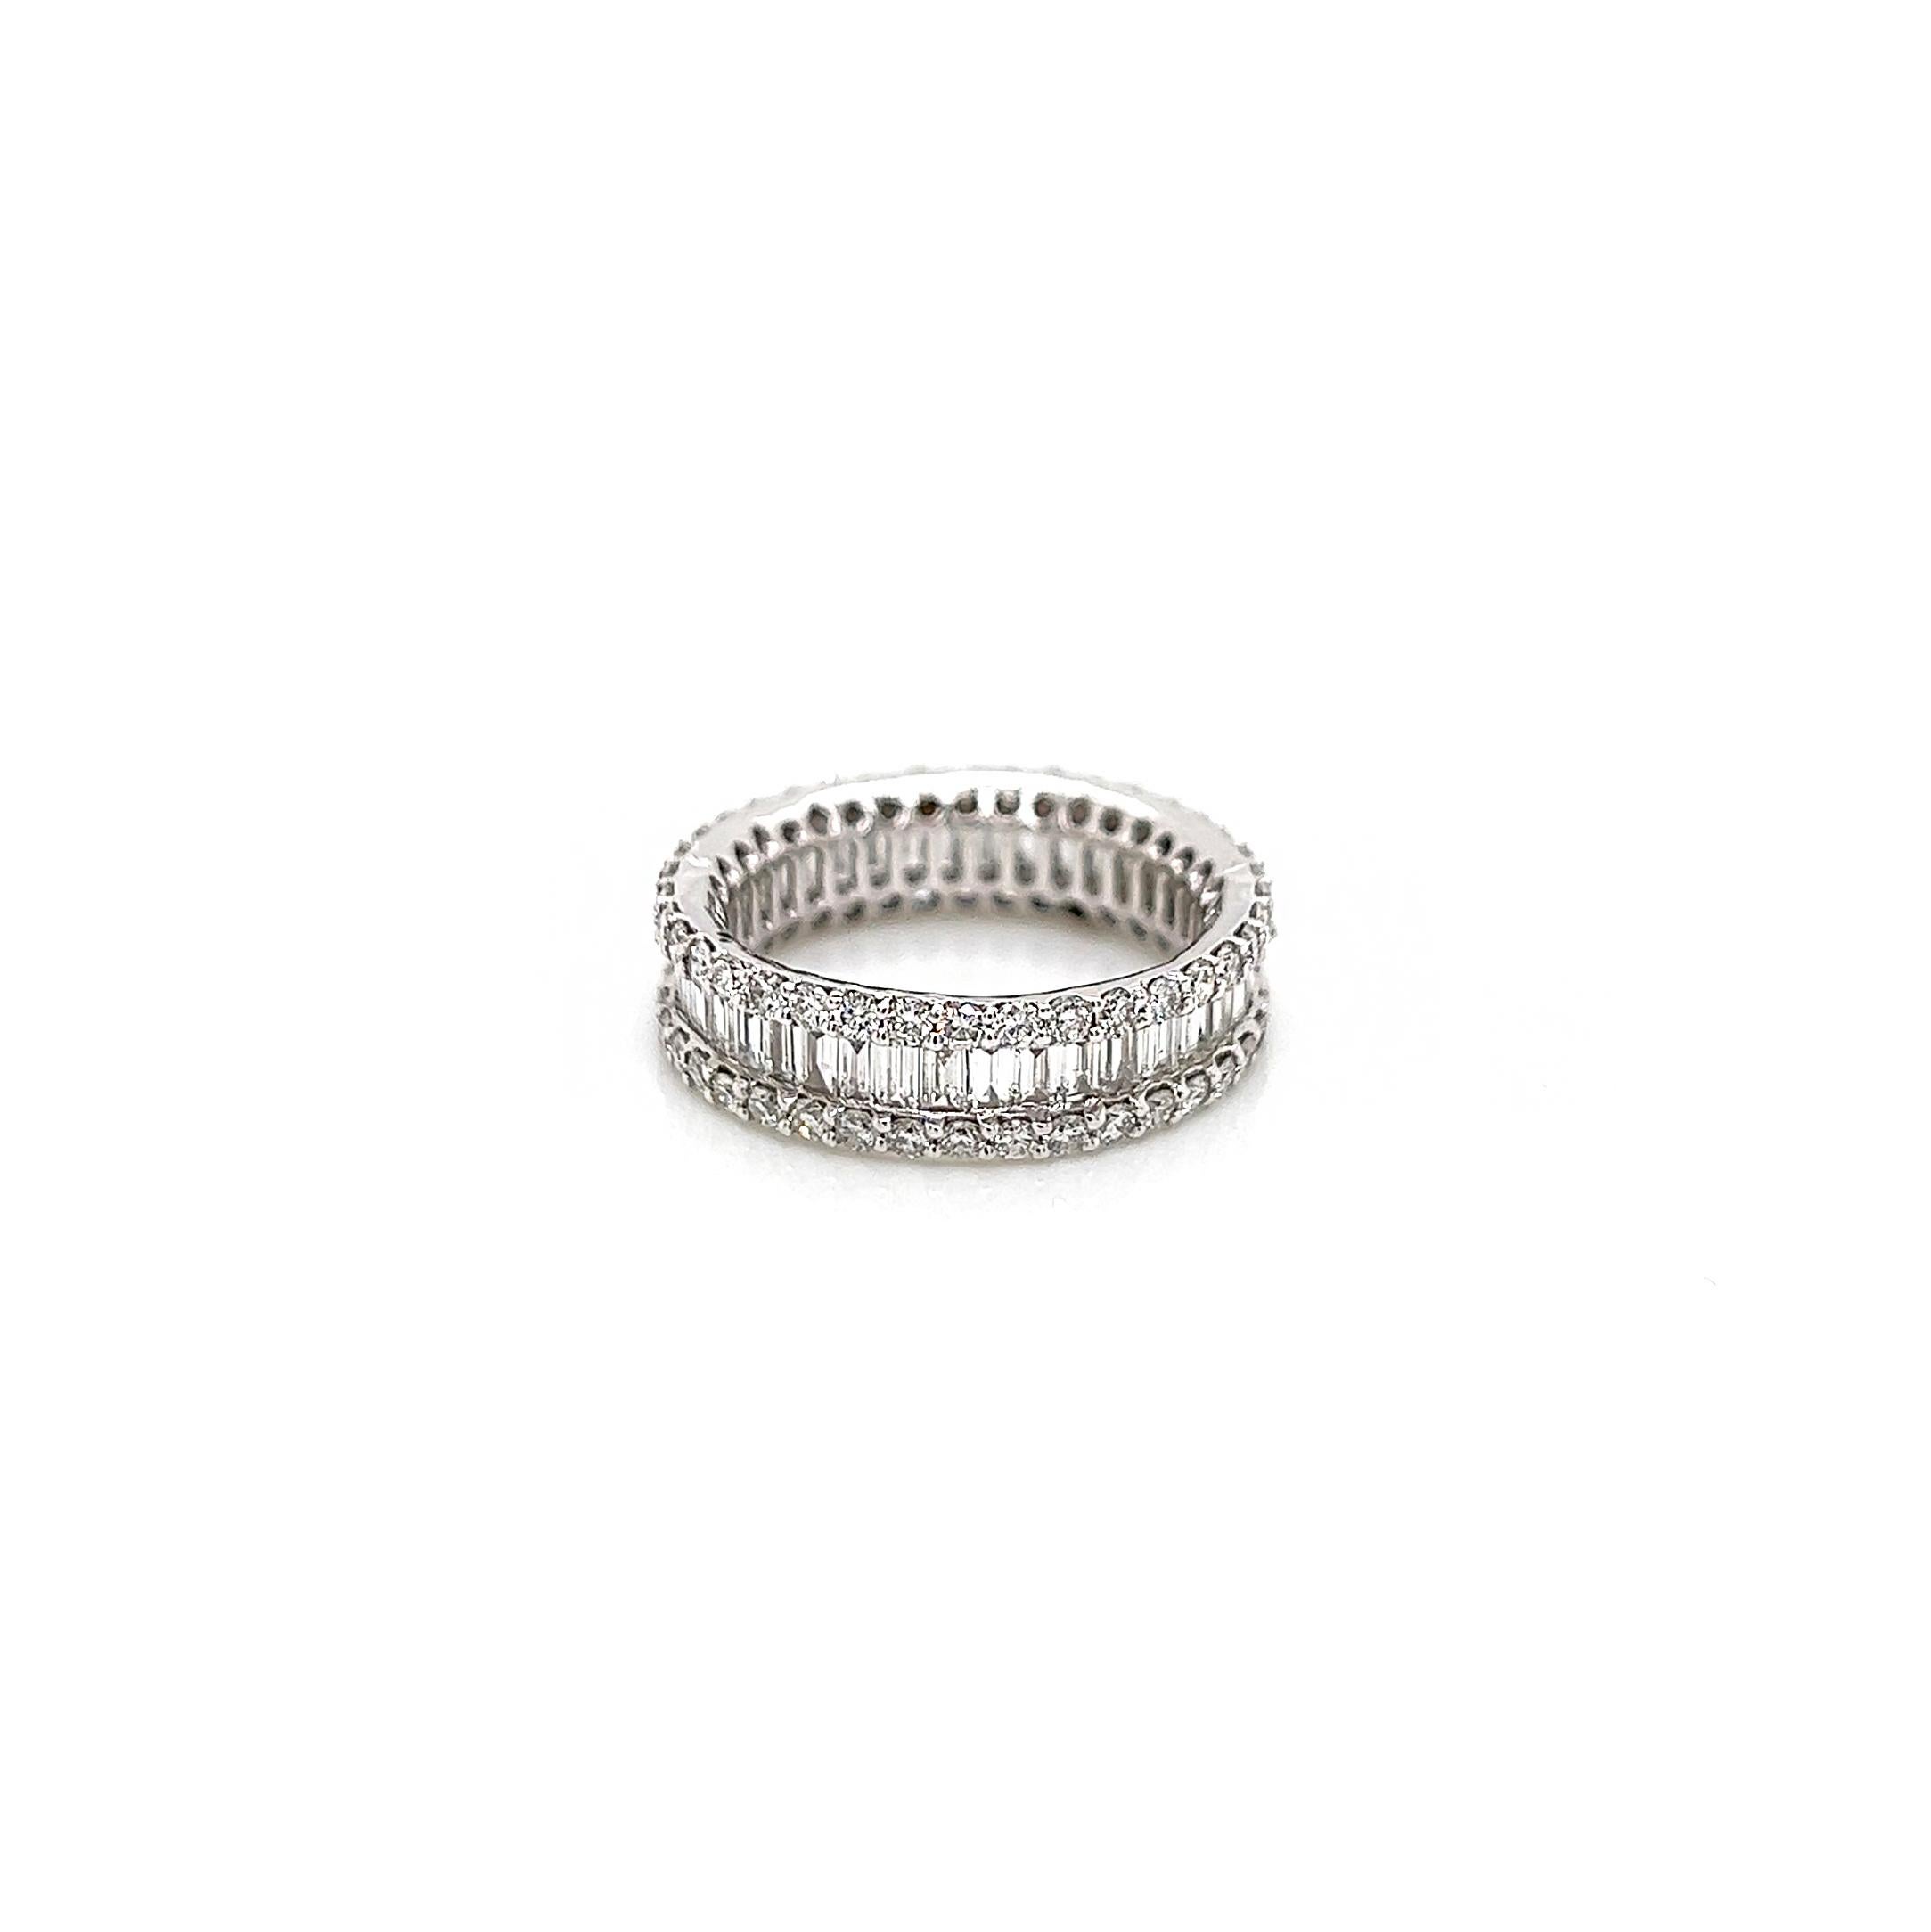 2.94 Carat Channel and Prong-Set Diamond Eternity Band

-Metal Type: 18K White Gold
-2.94 Carat Baguette and Round Natural Diamonds
          ~Baguette Stones: F-G Color, VS Clarity 
          ~Round Stones: F-G Color, SI Clarity 

-Size 6.5

Made